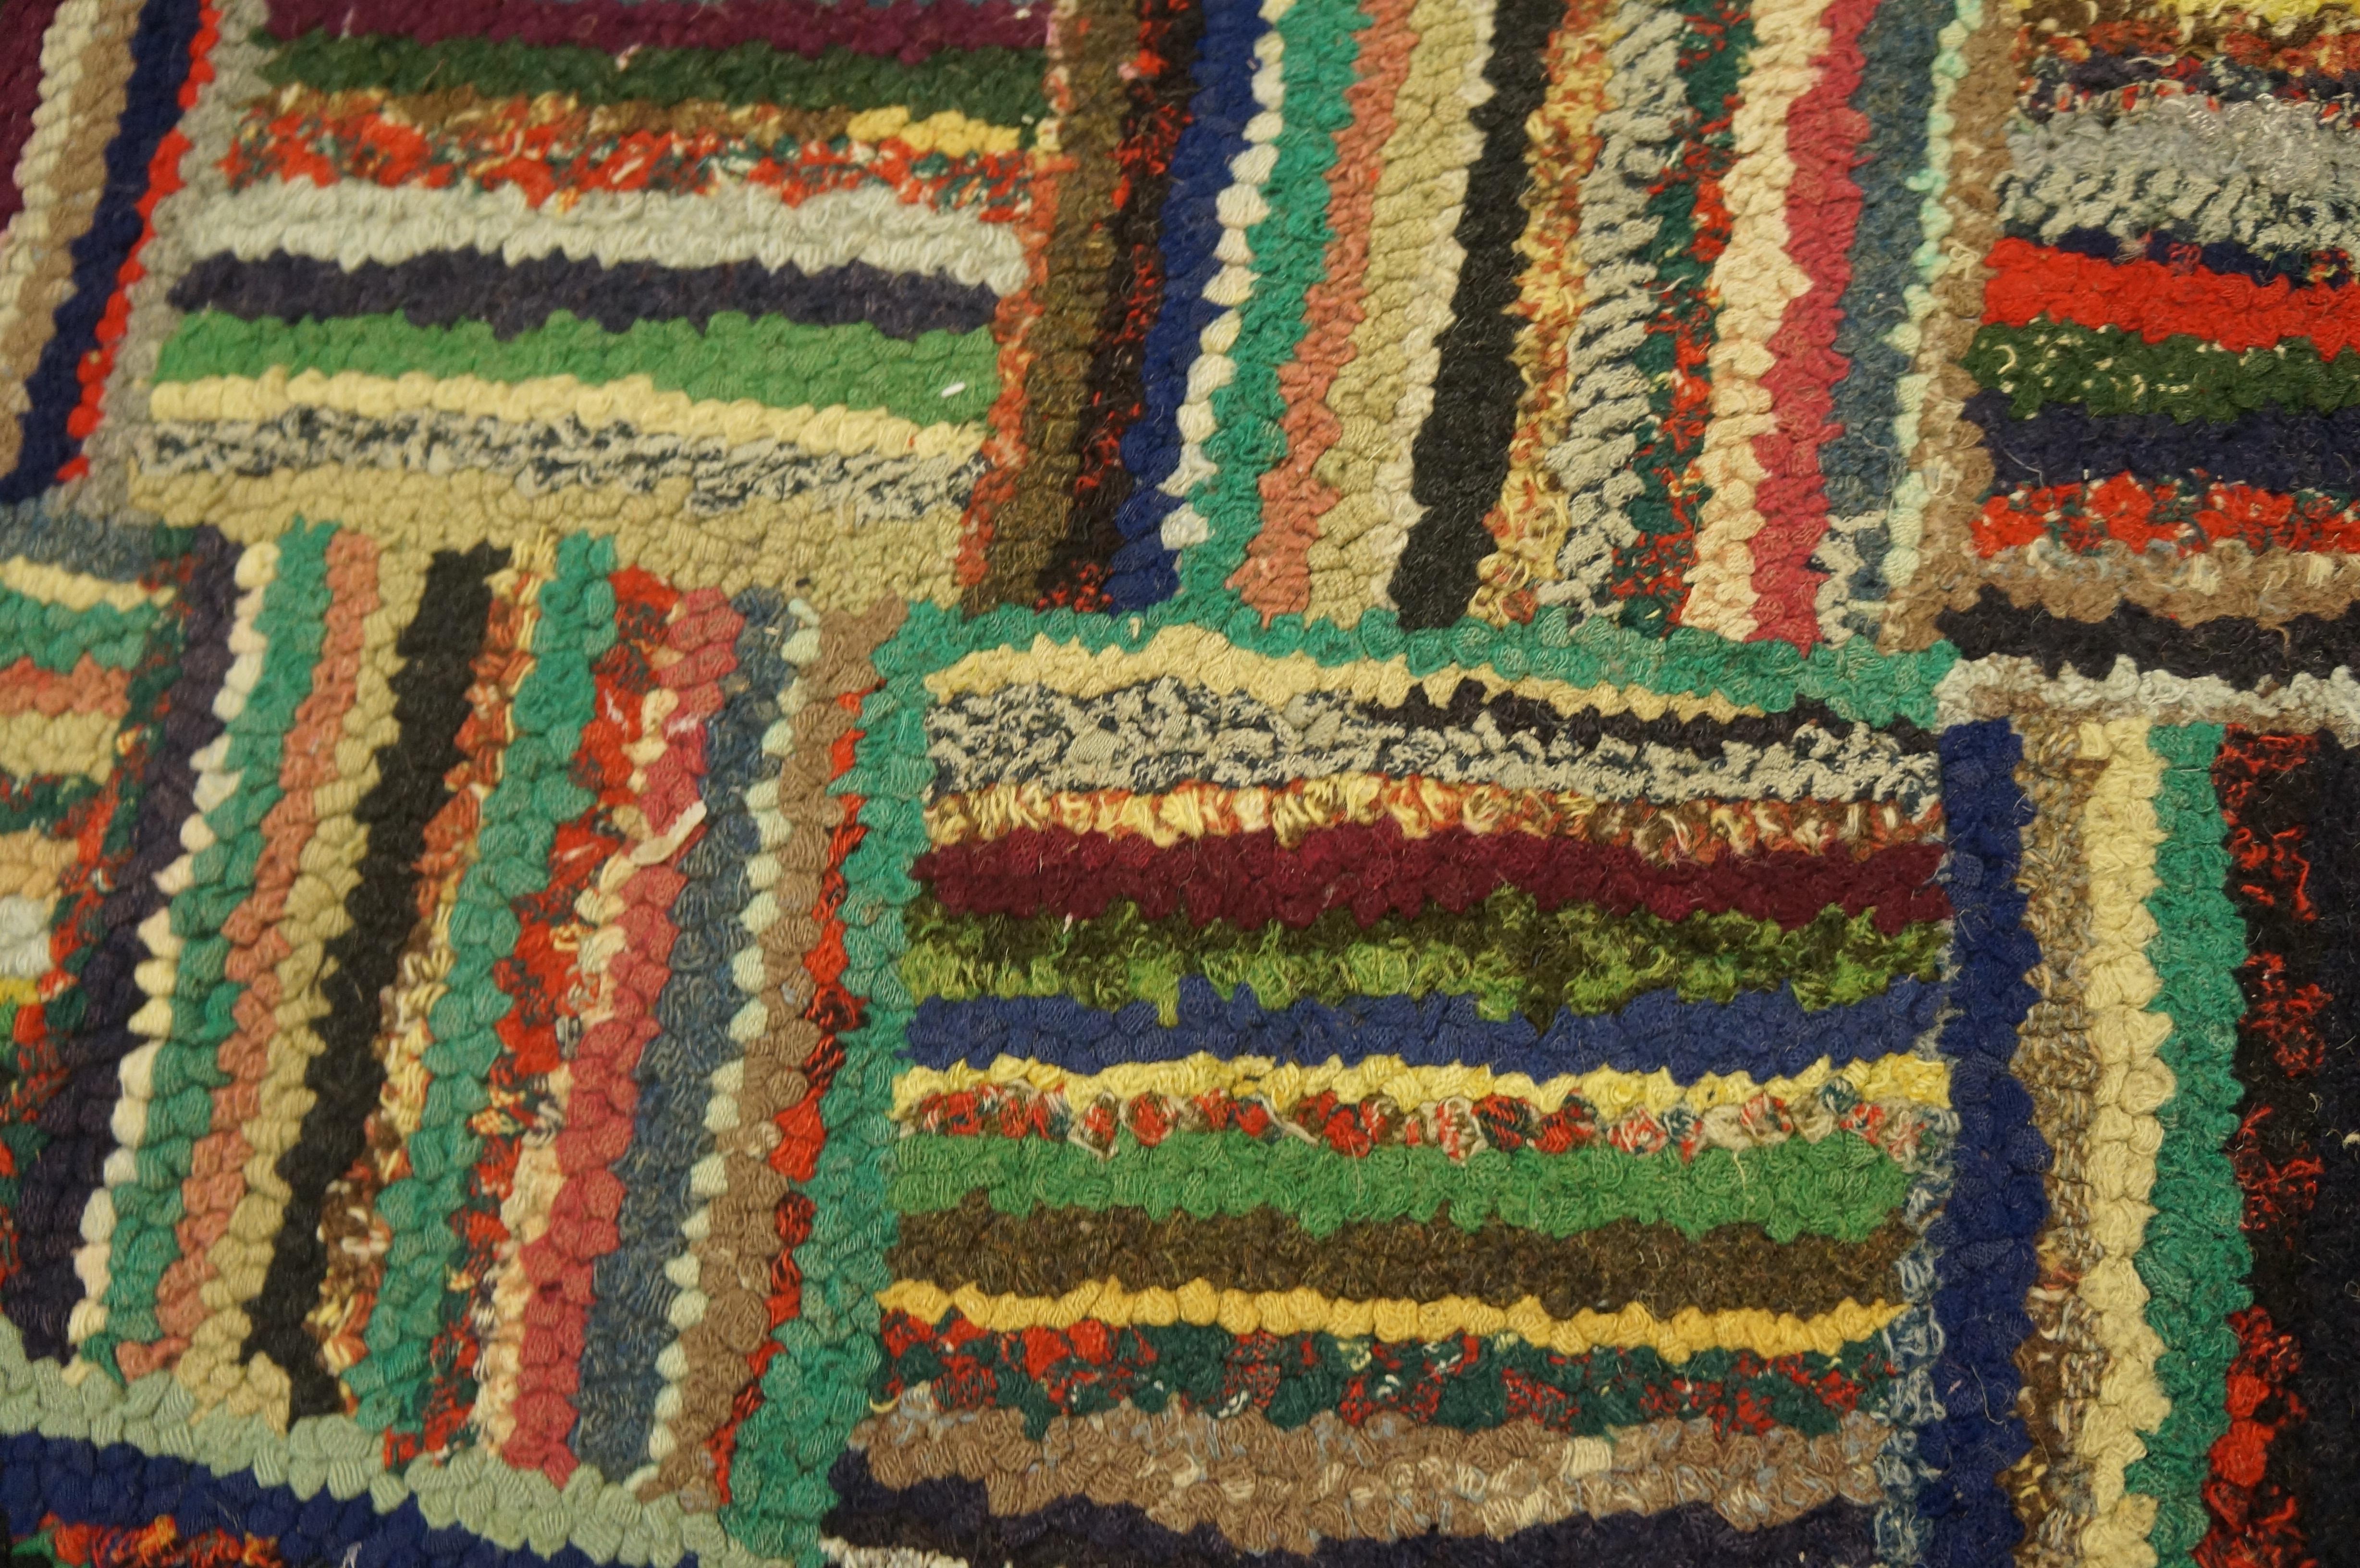 1930s American Hooked Rug with Basket Weave Pattern ( 2'4